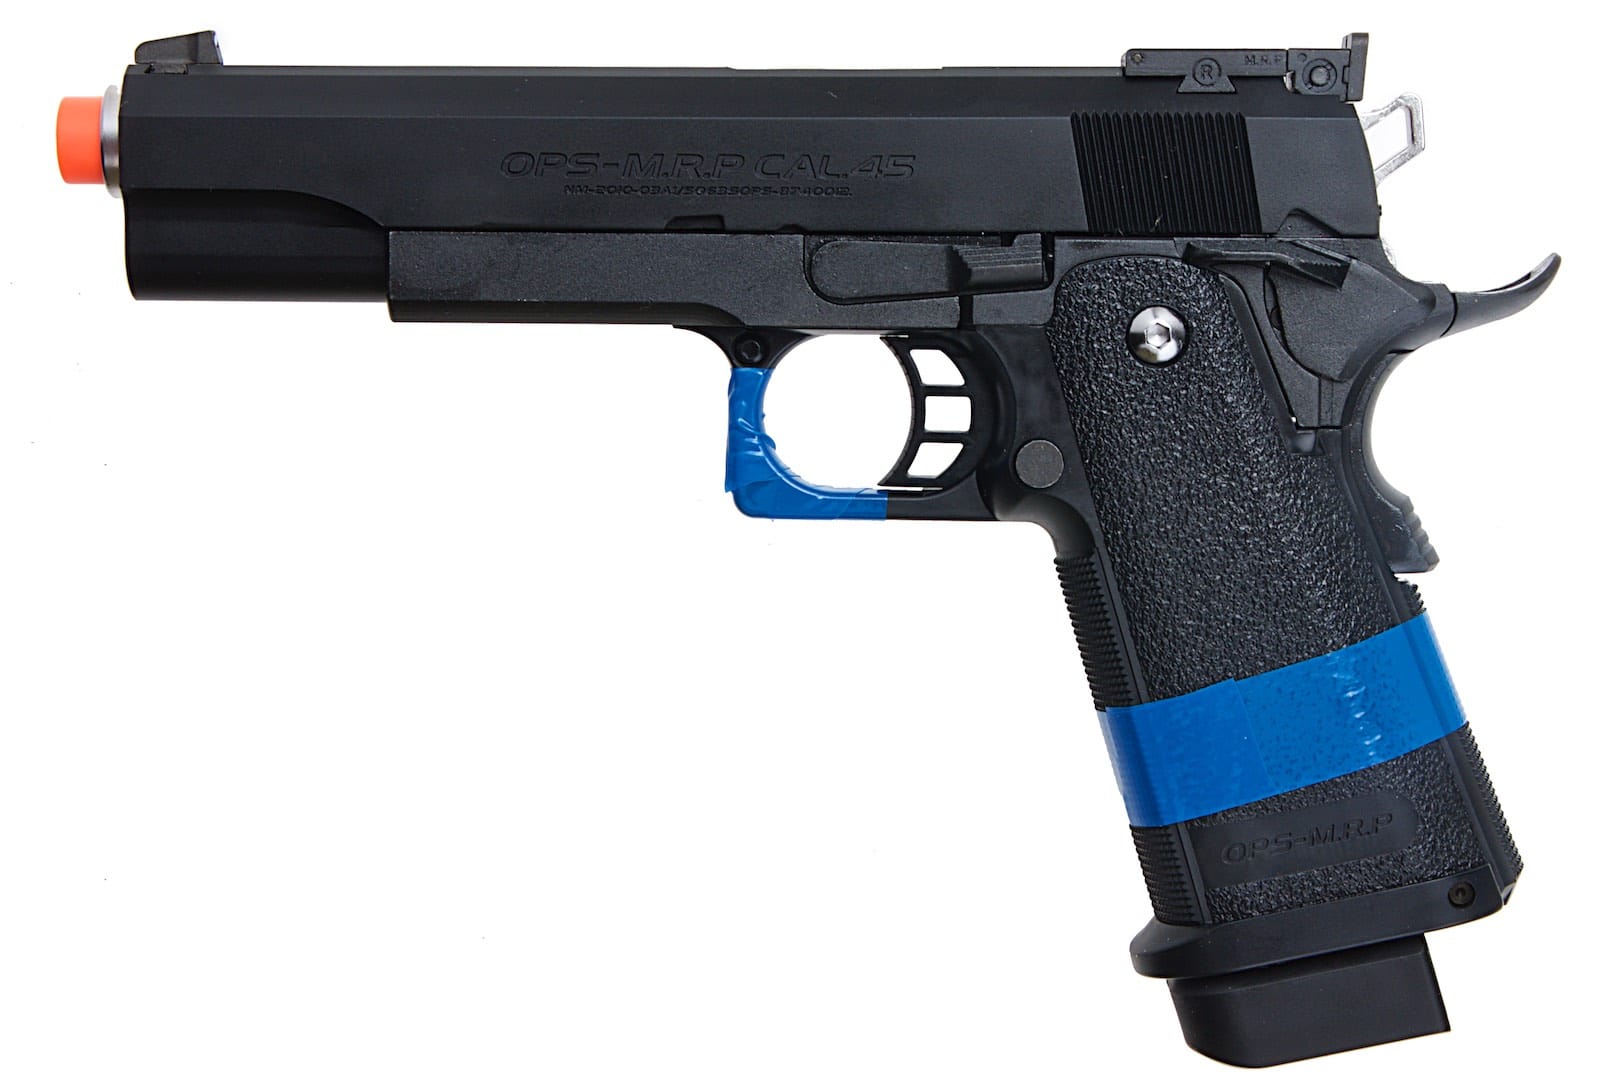 SB199 requires that airsoft pistols have bright colored tape affixed to their pistol grip and trigger guard.